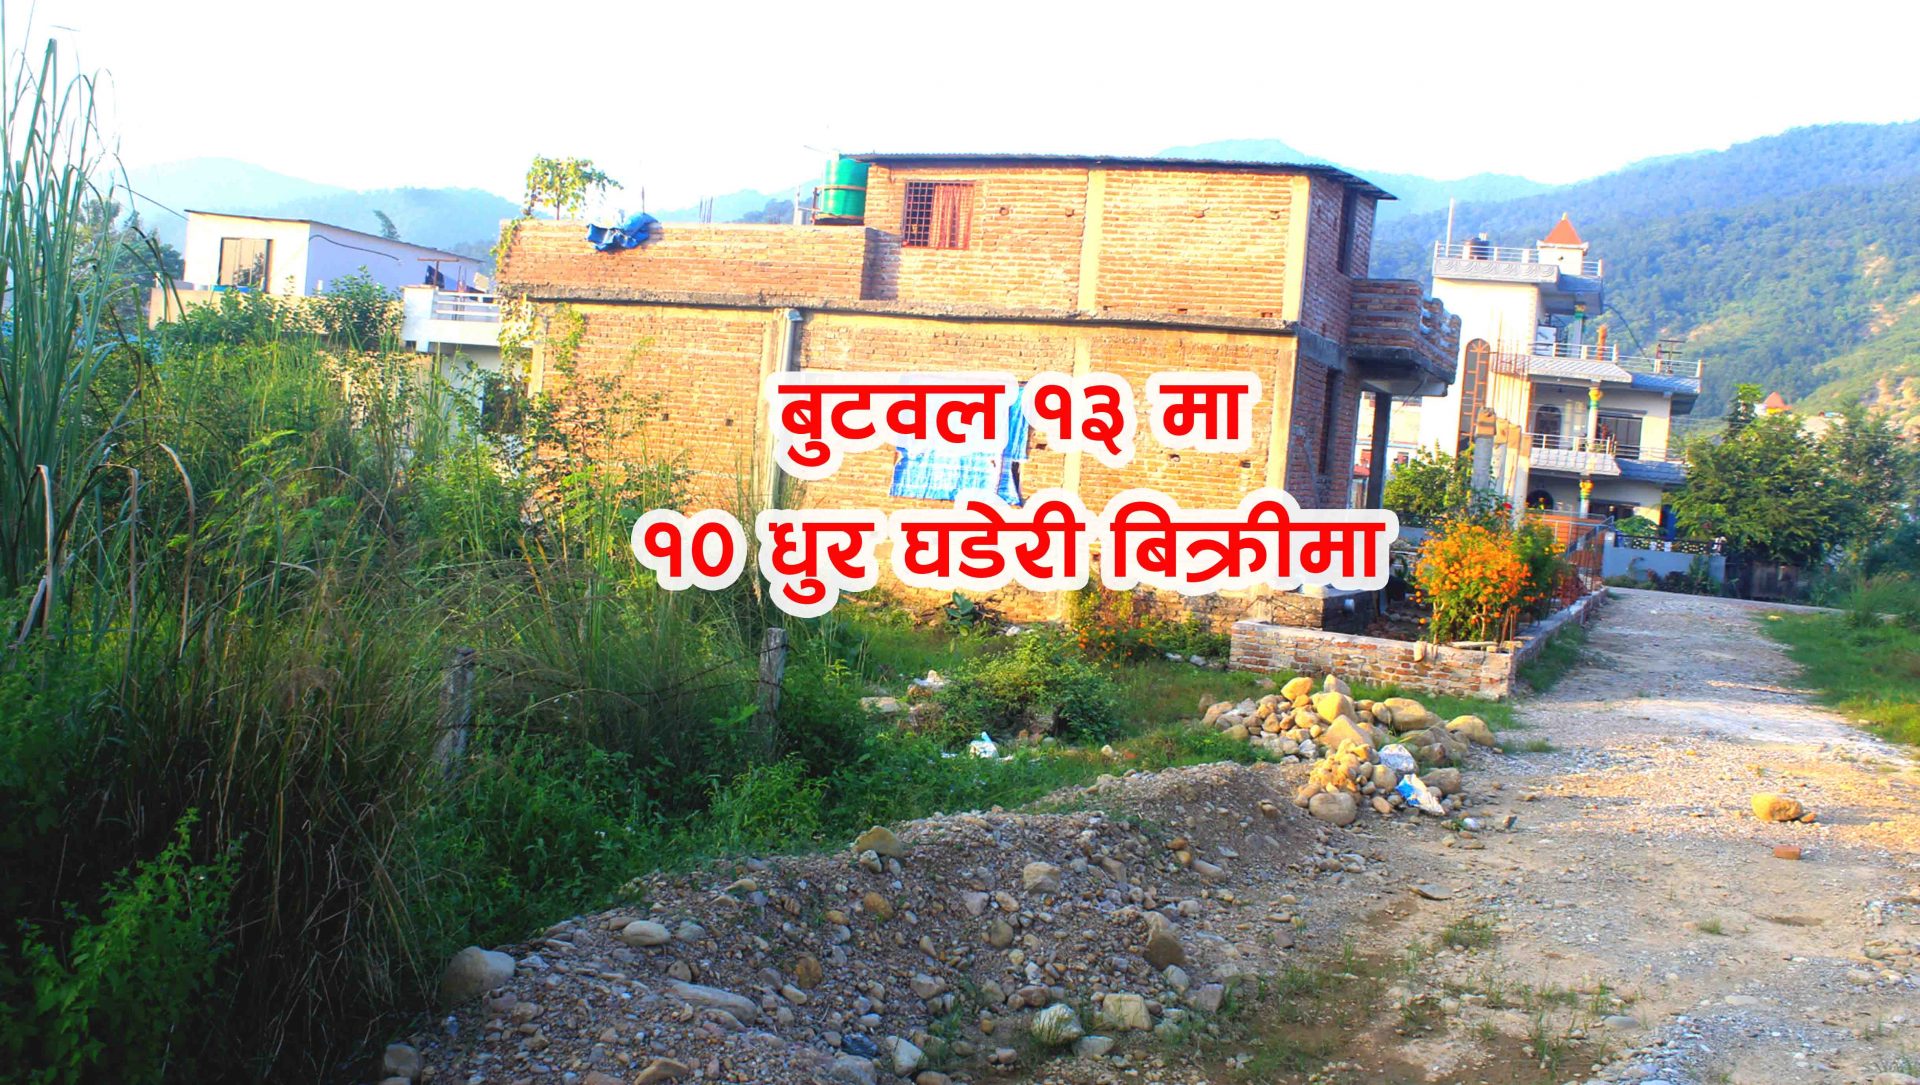 Cheap land for sale in Butwal 13 Rupandehi Nepal